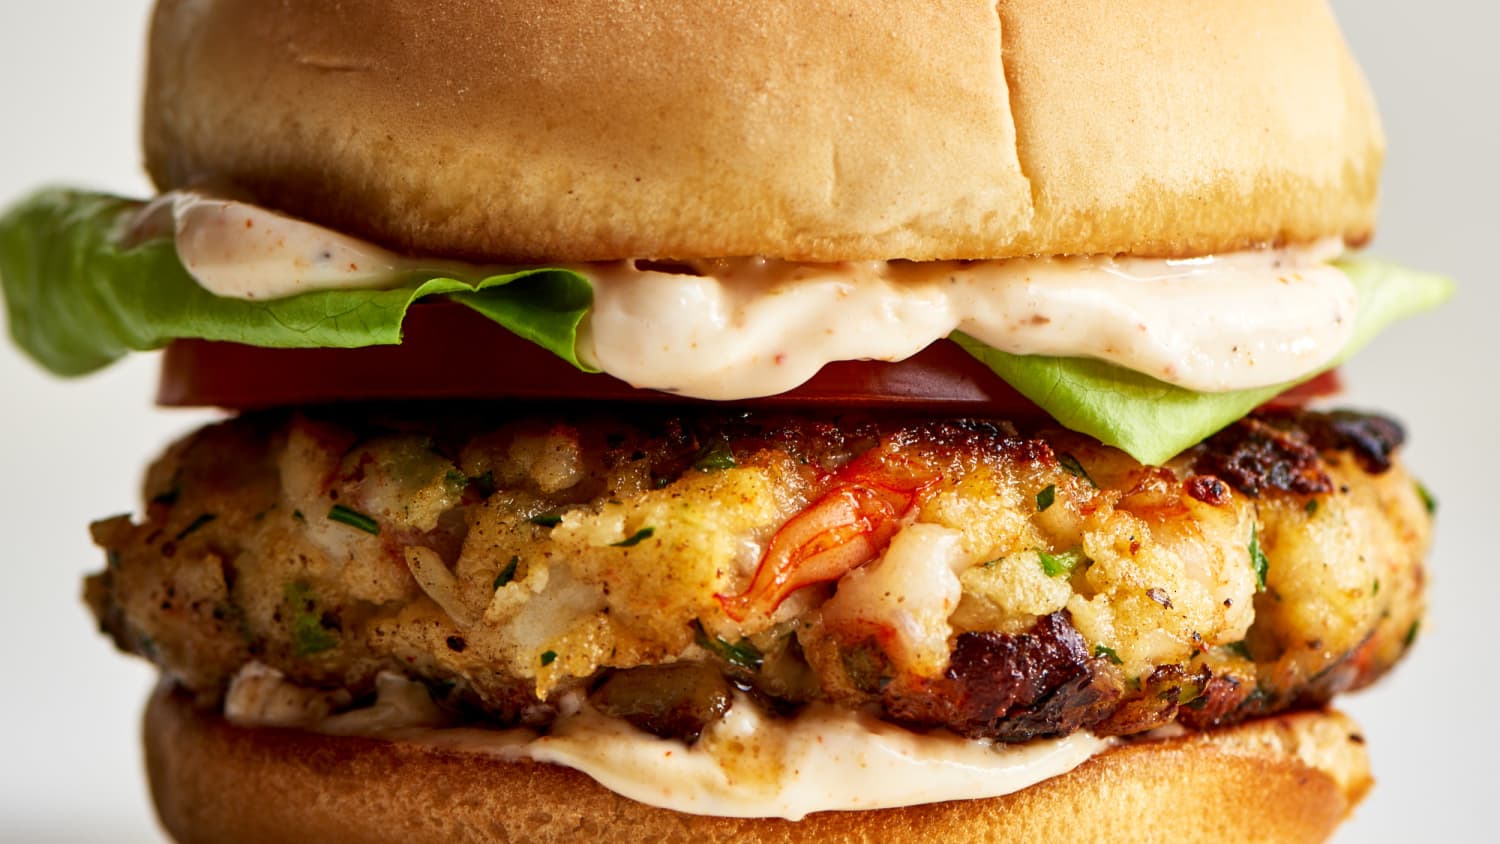 Shrimp Burger {Perfect Texture with Southern Spices} –